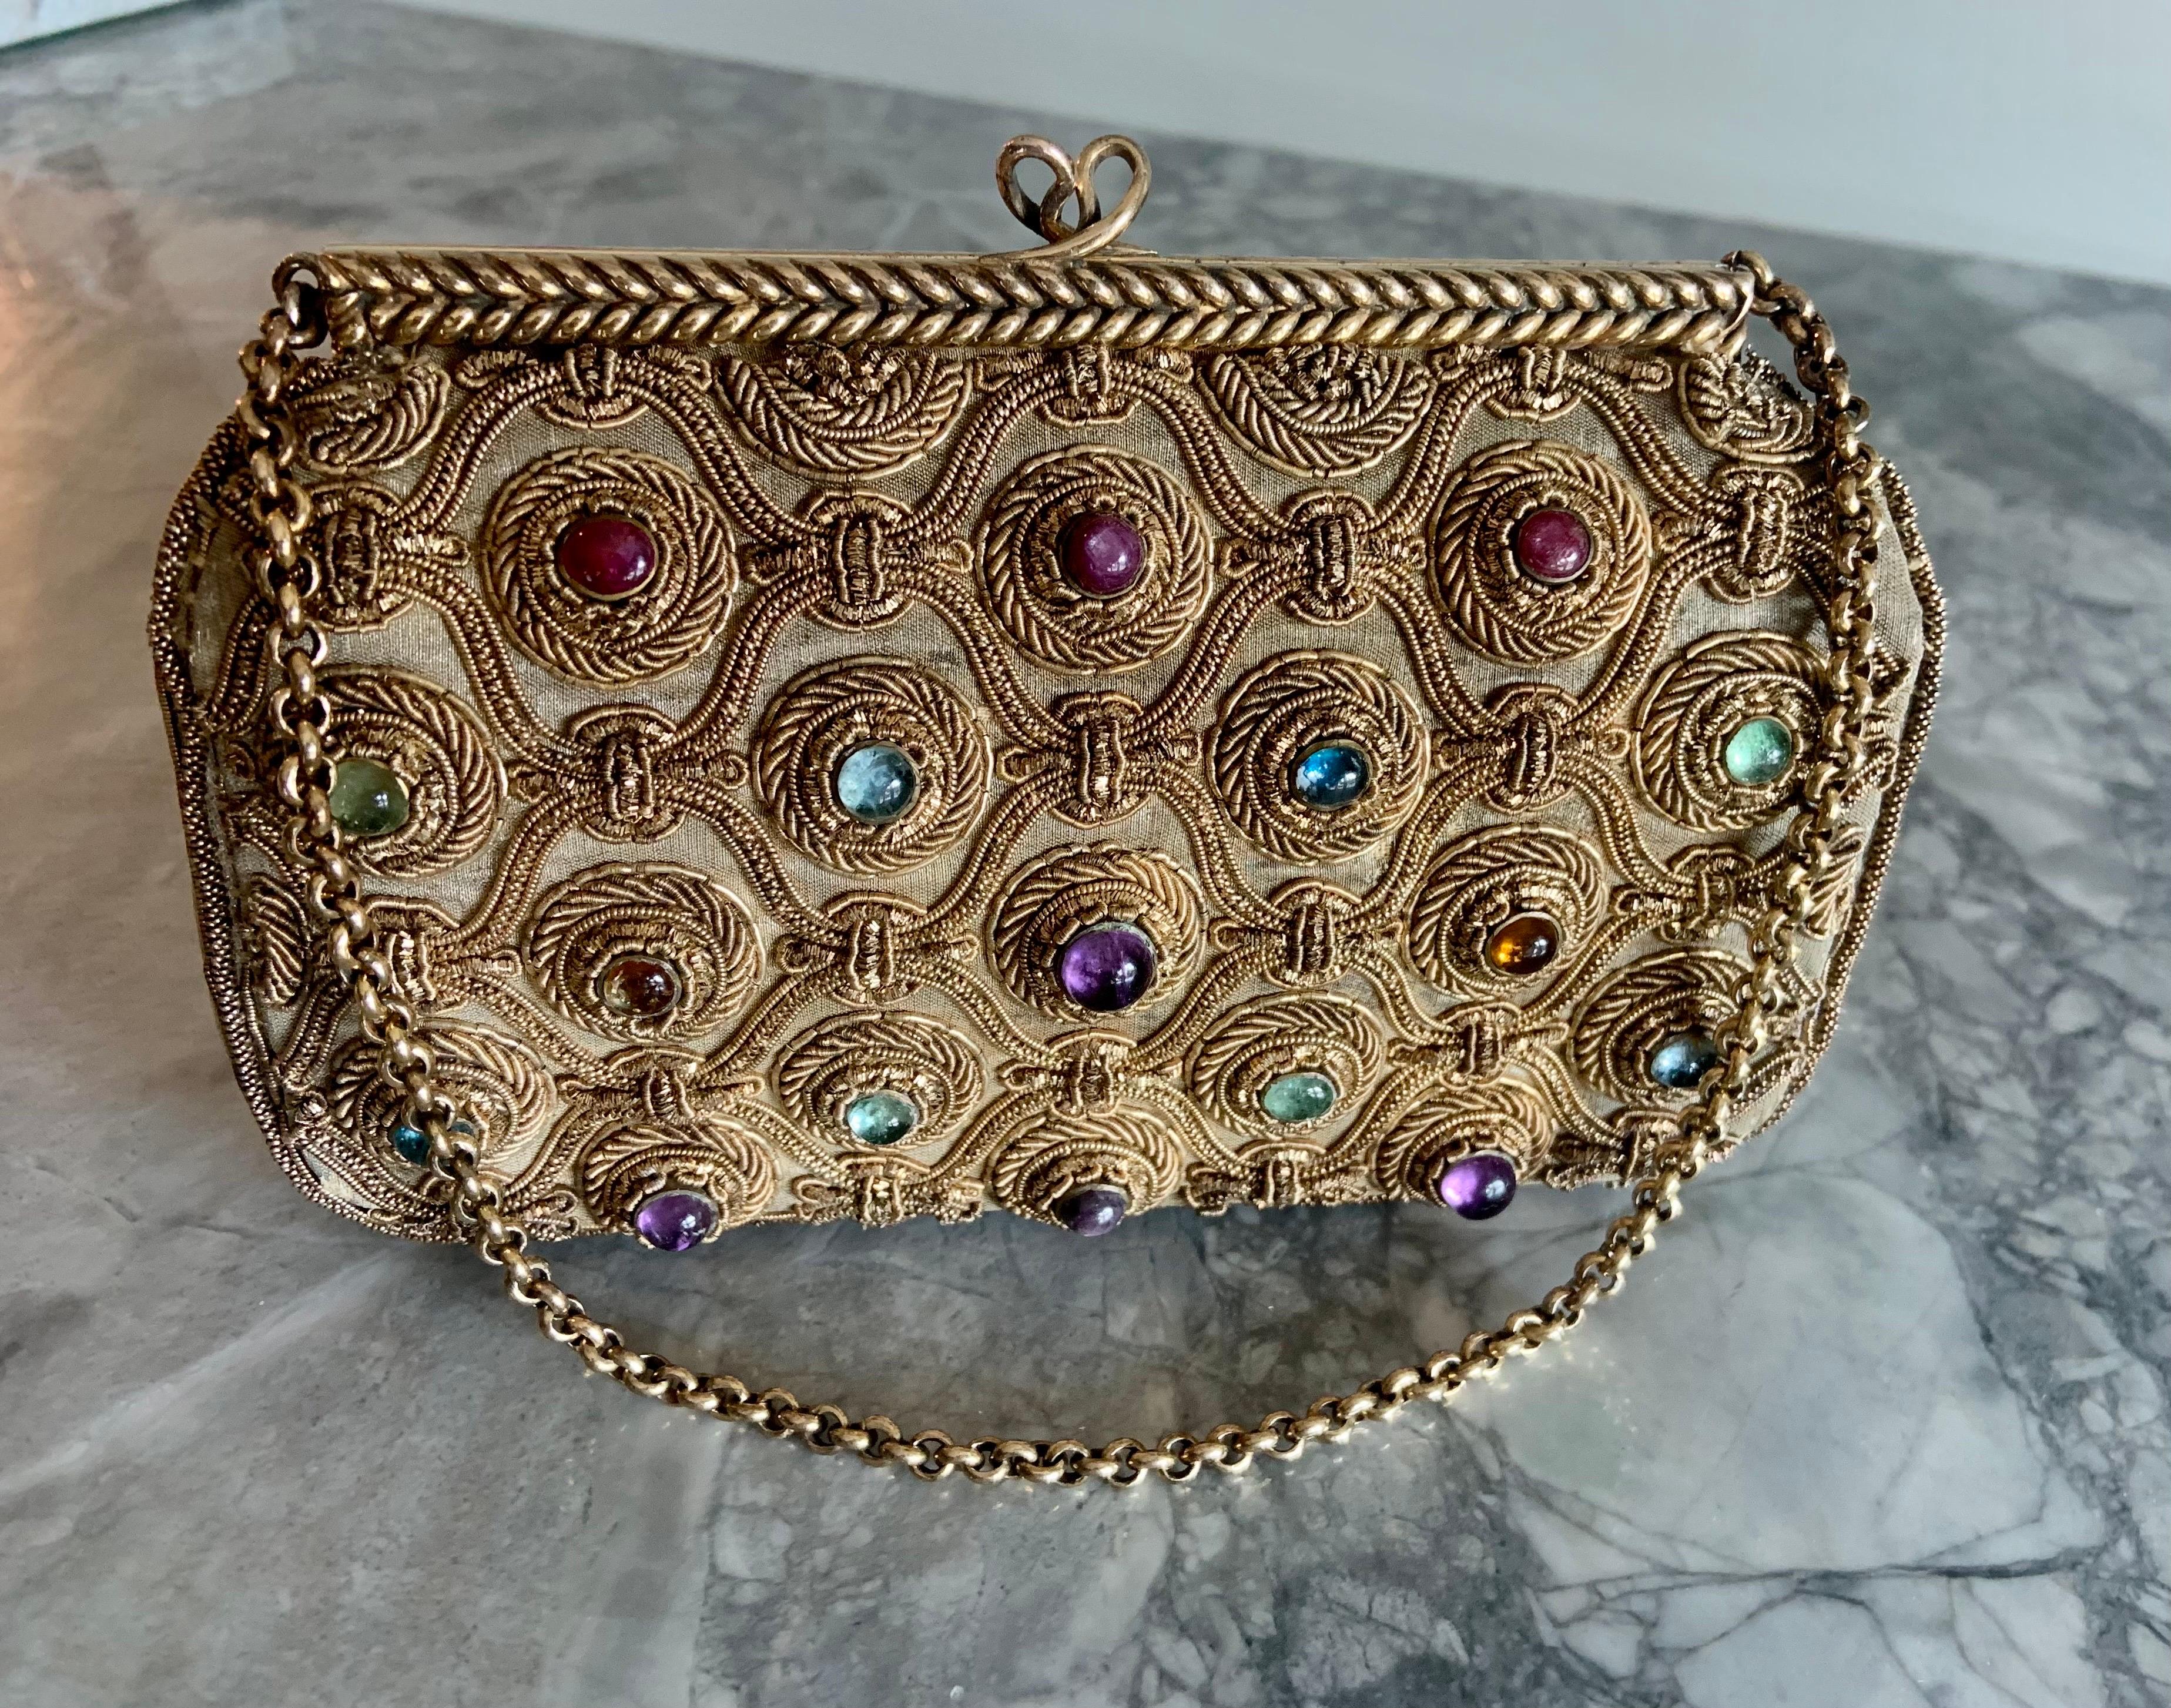 A rare and collectible piece from Van Cleef & Arpels, this mid century gem set evening bag was Made in France.  It has a large carved amethyst below the clasp on the front of the bag. This is surrounded by cabochon rubies, emeralds, amethysts,